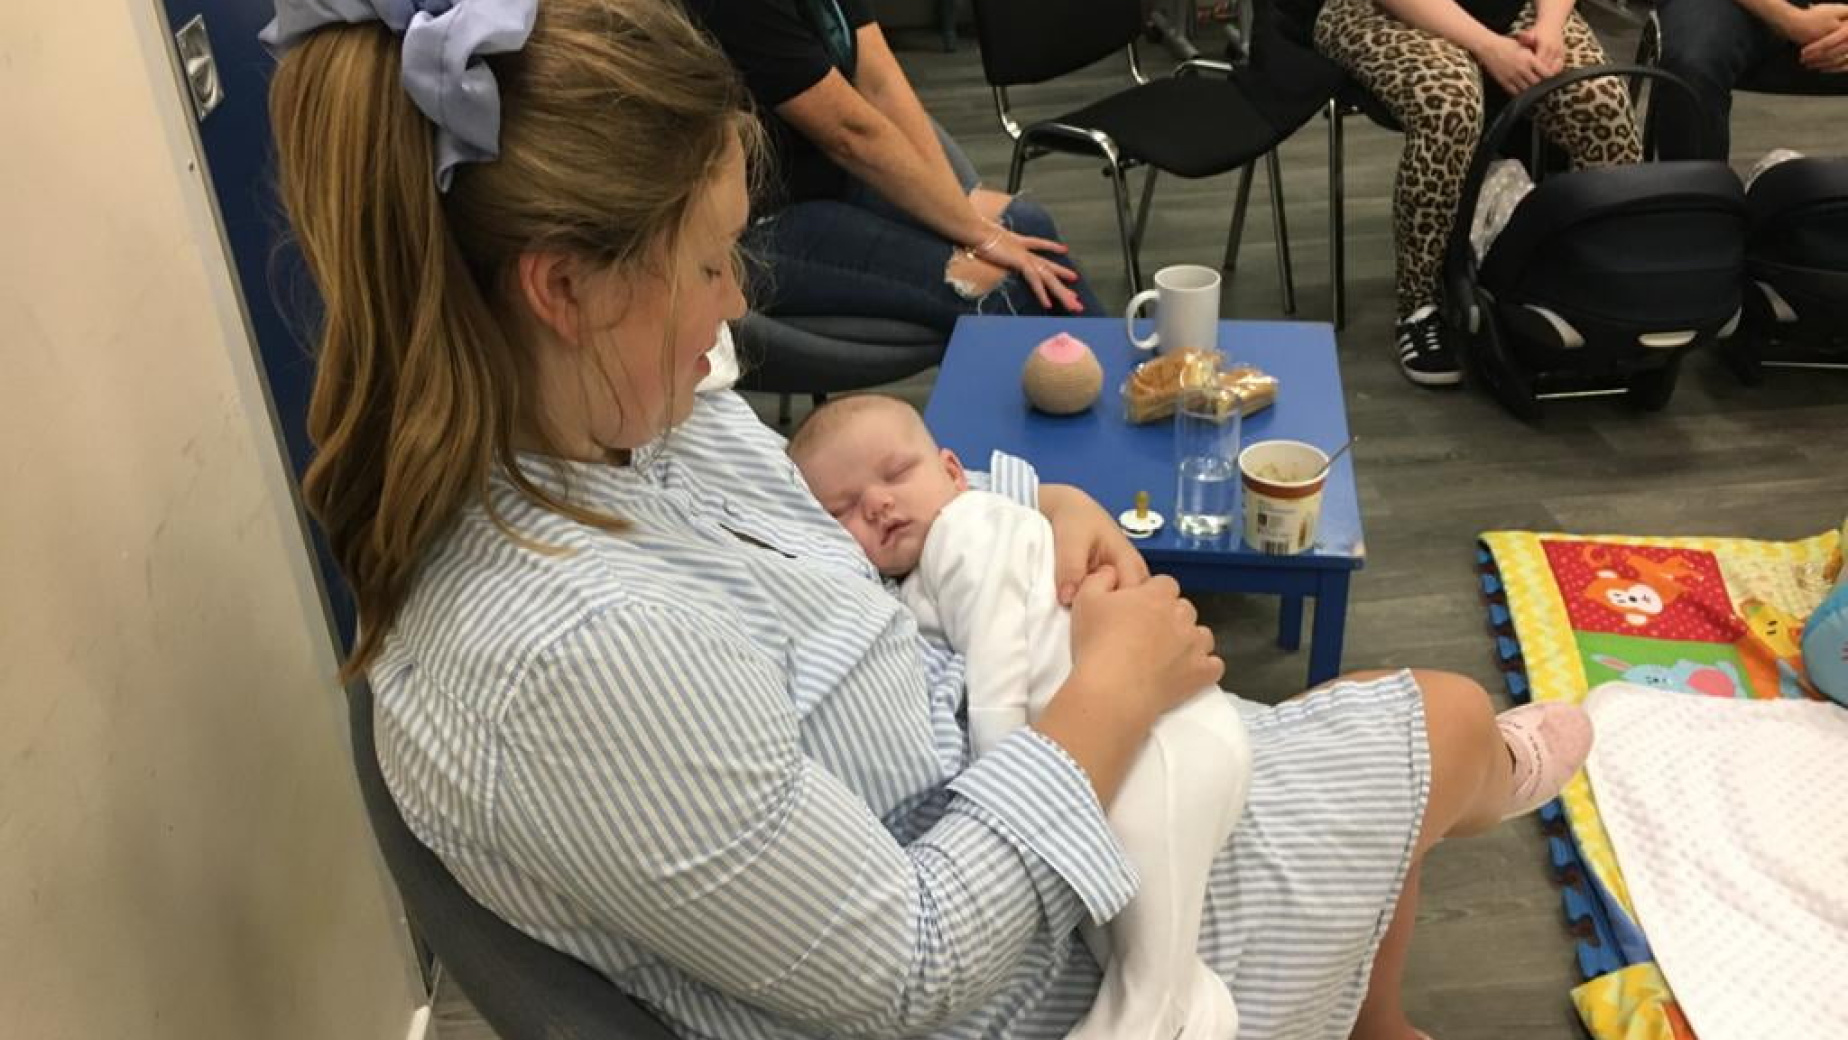 Baby asleep at support group